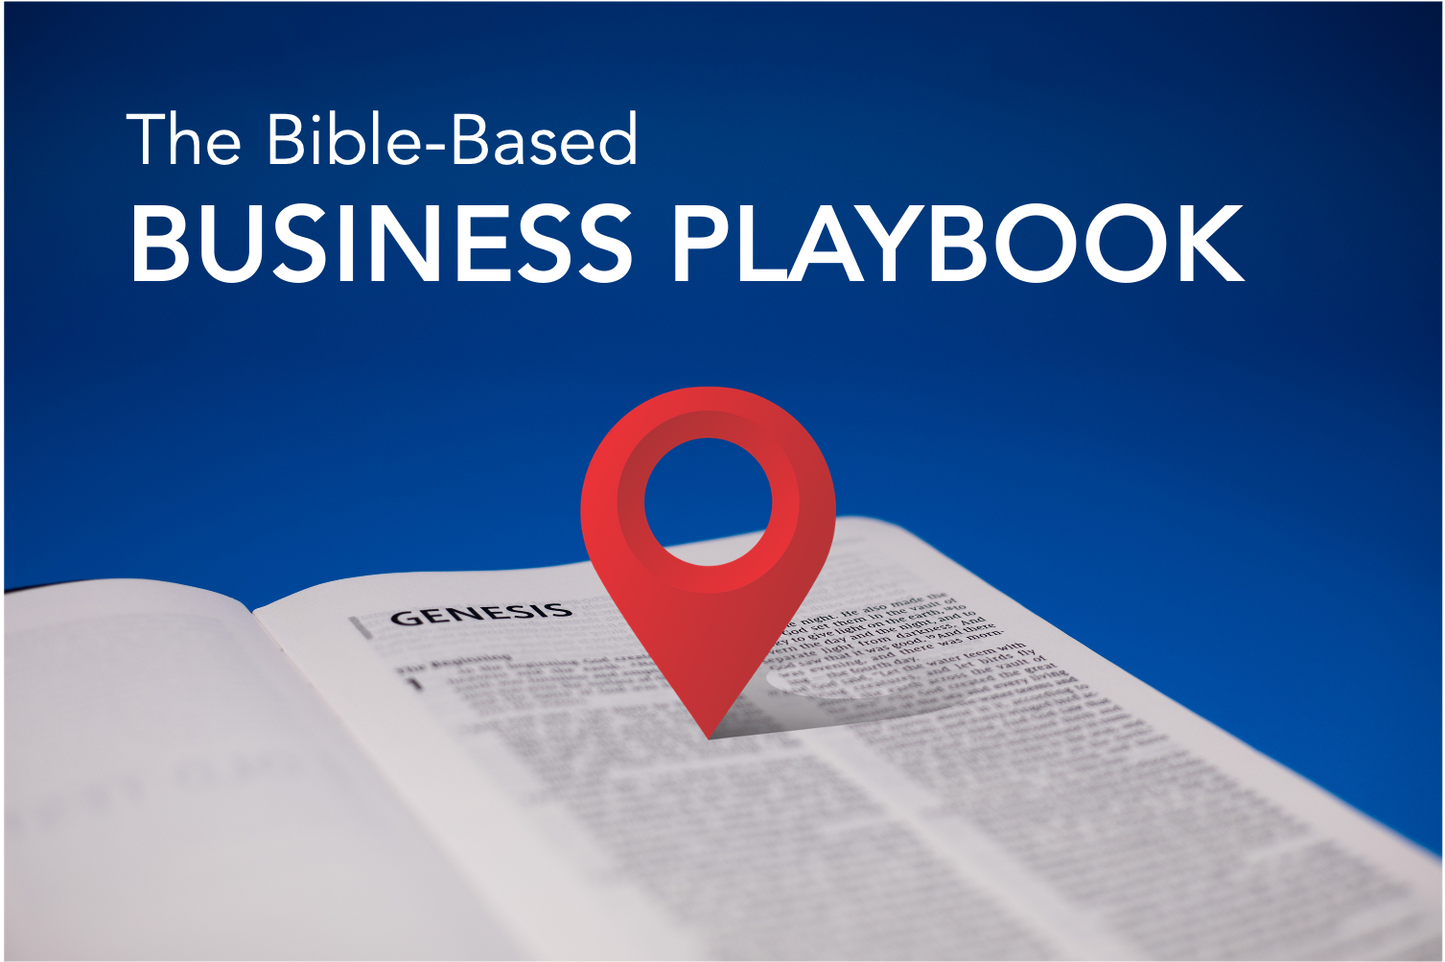 The Bible-Based Business Playbook